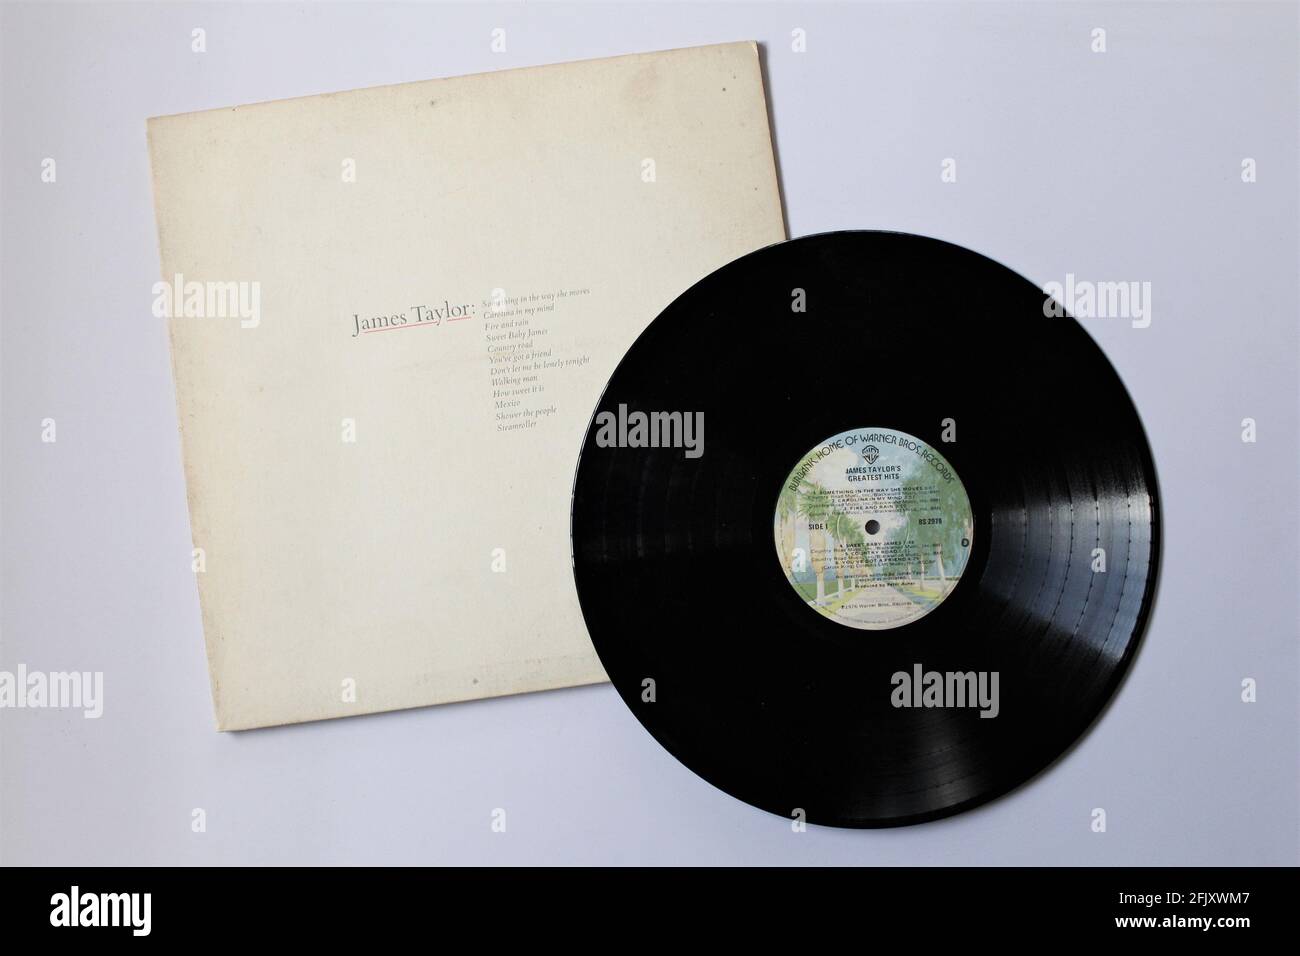 Pop rock and soft rock artist, James Taylor music album on vinyl record LP  disc. Titled: Greatest Hits Stock Photo - Alamy